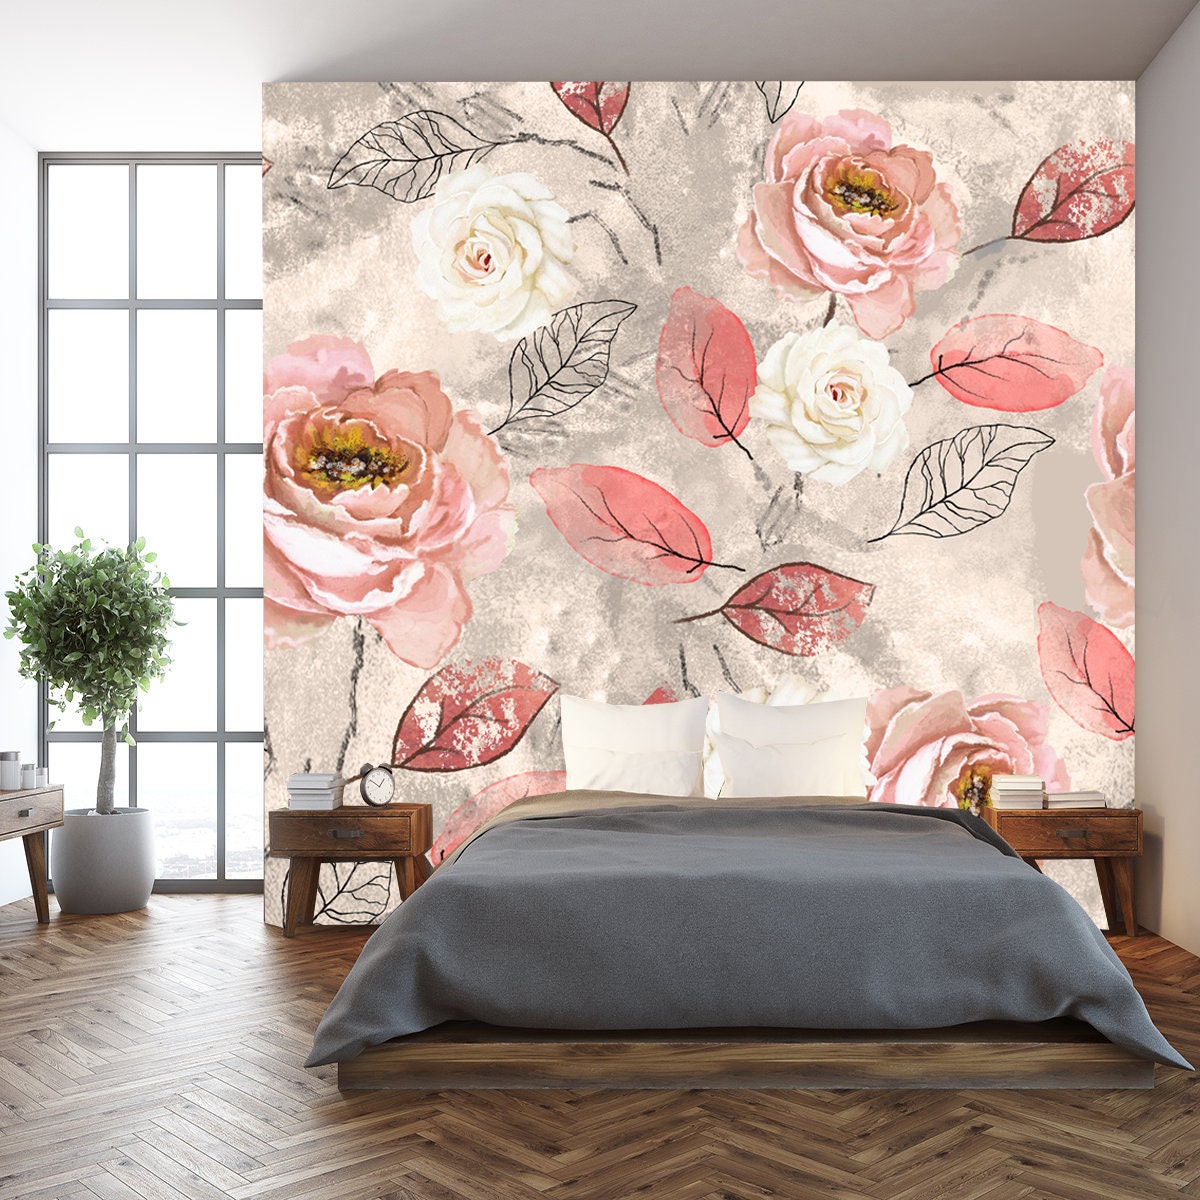 Seamless Pattern with Flowers and Leaves. Vintage Watercolors with Pink Roses on a Gray Background Wallpaper Bedroom Mural